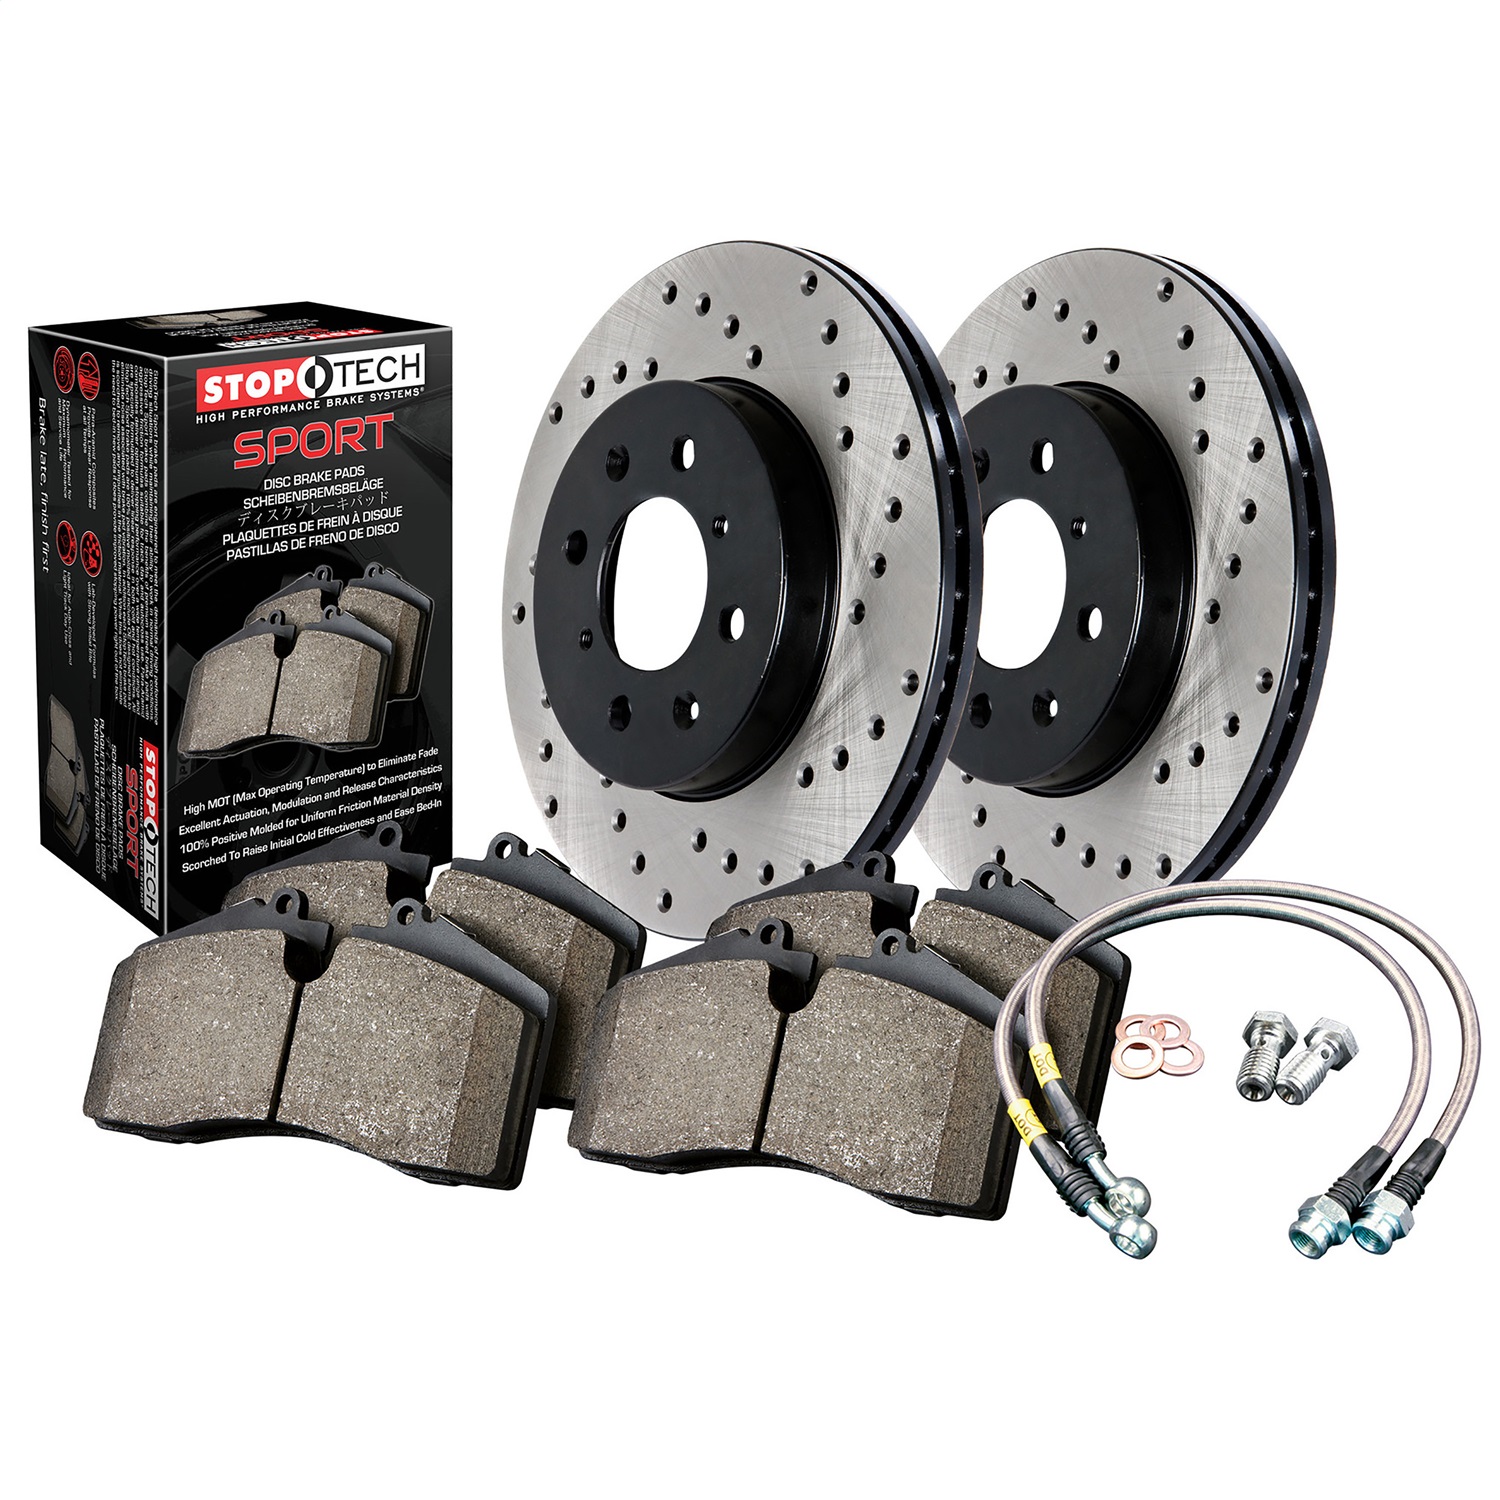 StopTech 979.61001R Sport Disc Brake Kit w/Cross-Drilled Rotor Fits Mustang